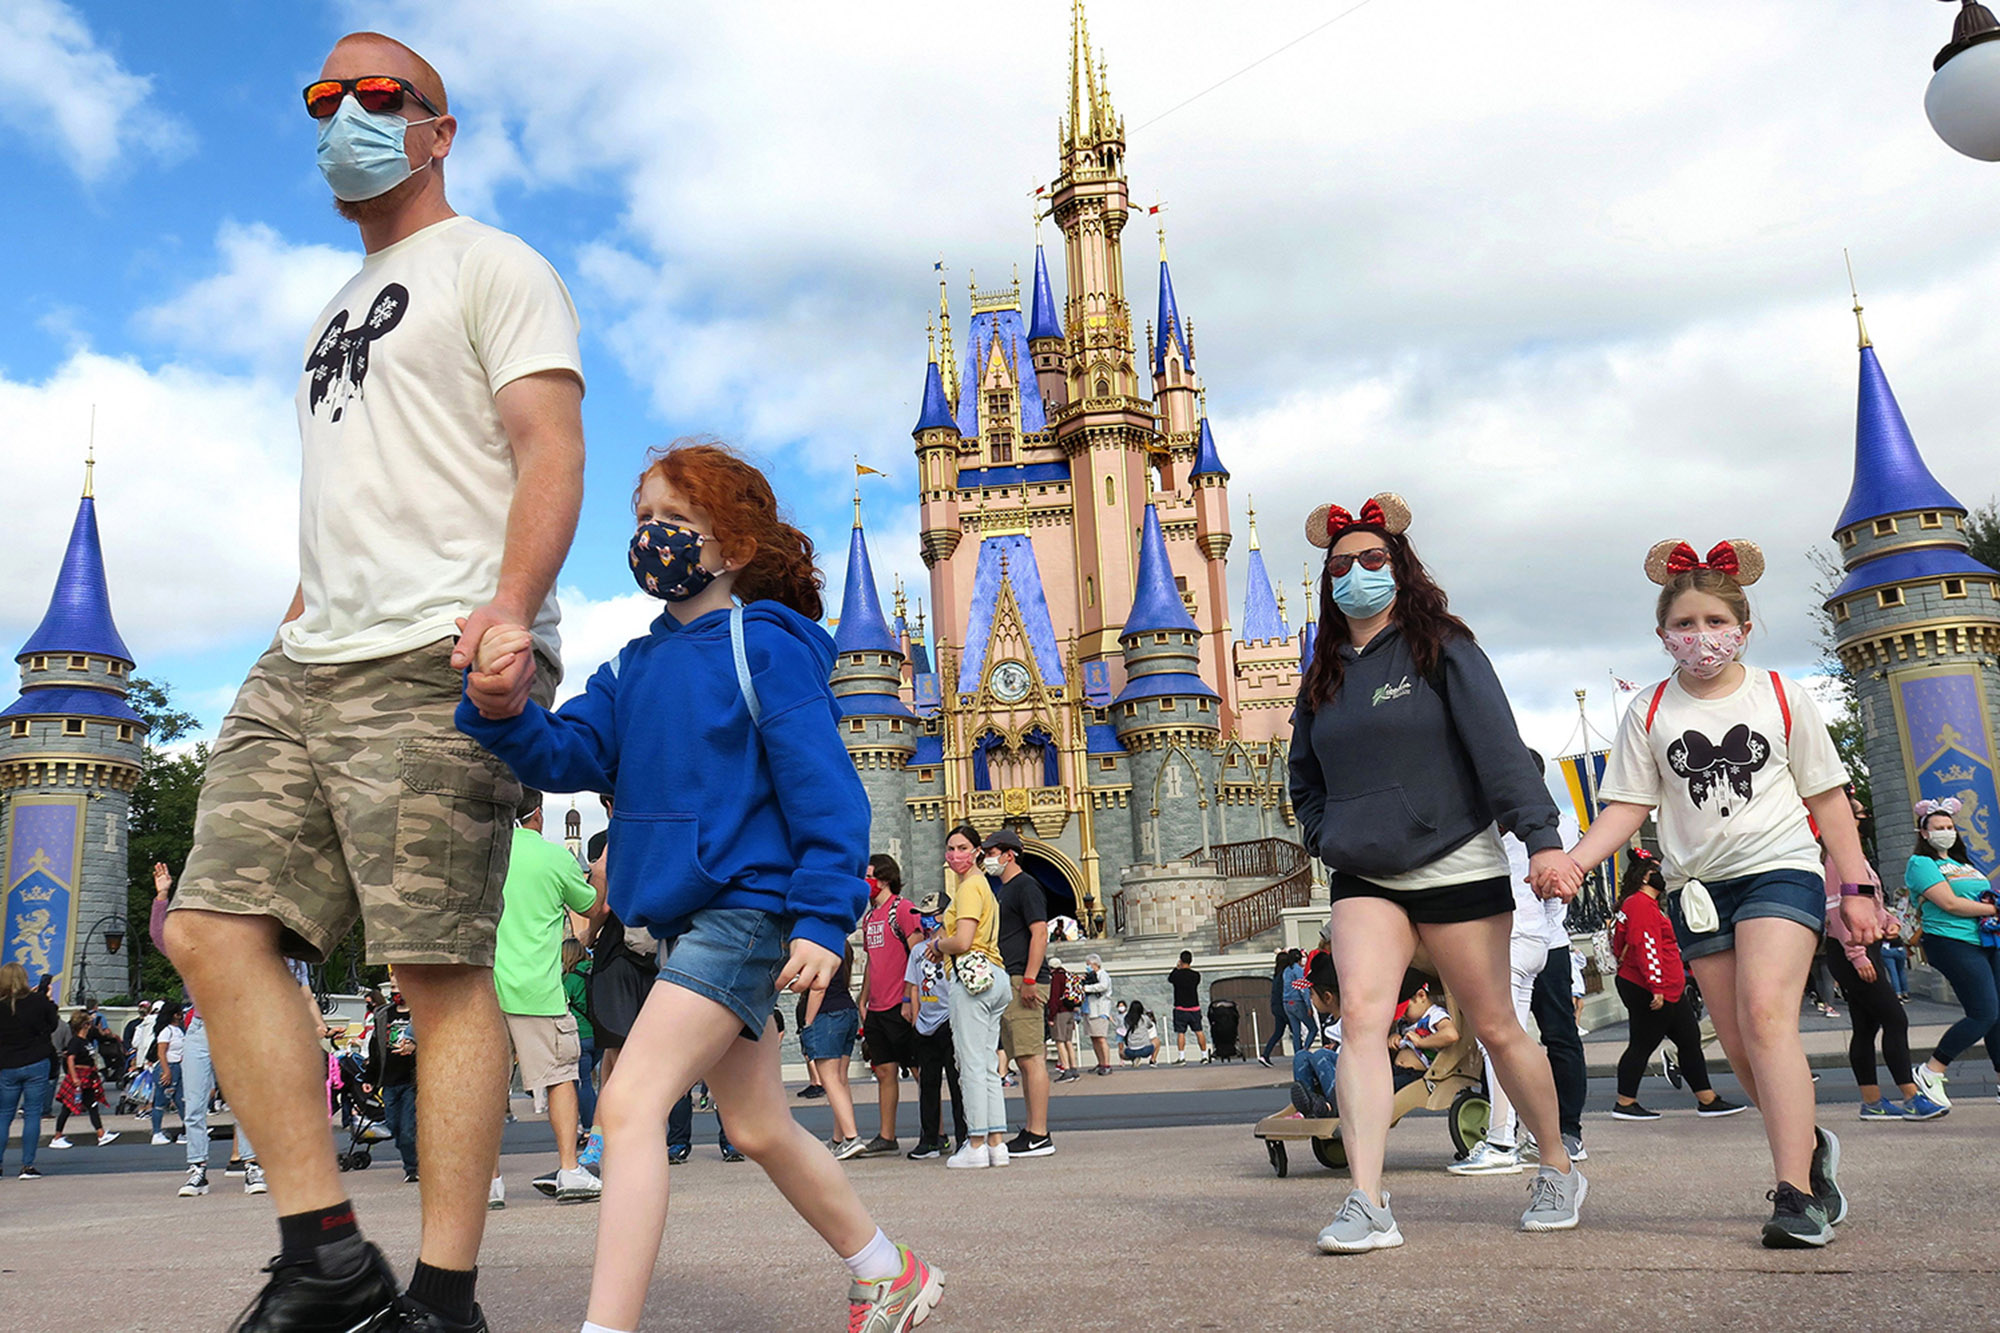 BREAKING Massive Brawl Erupts At Disney World After Two Families Enter